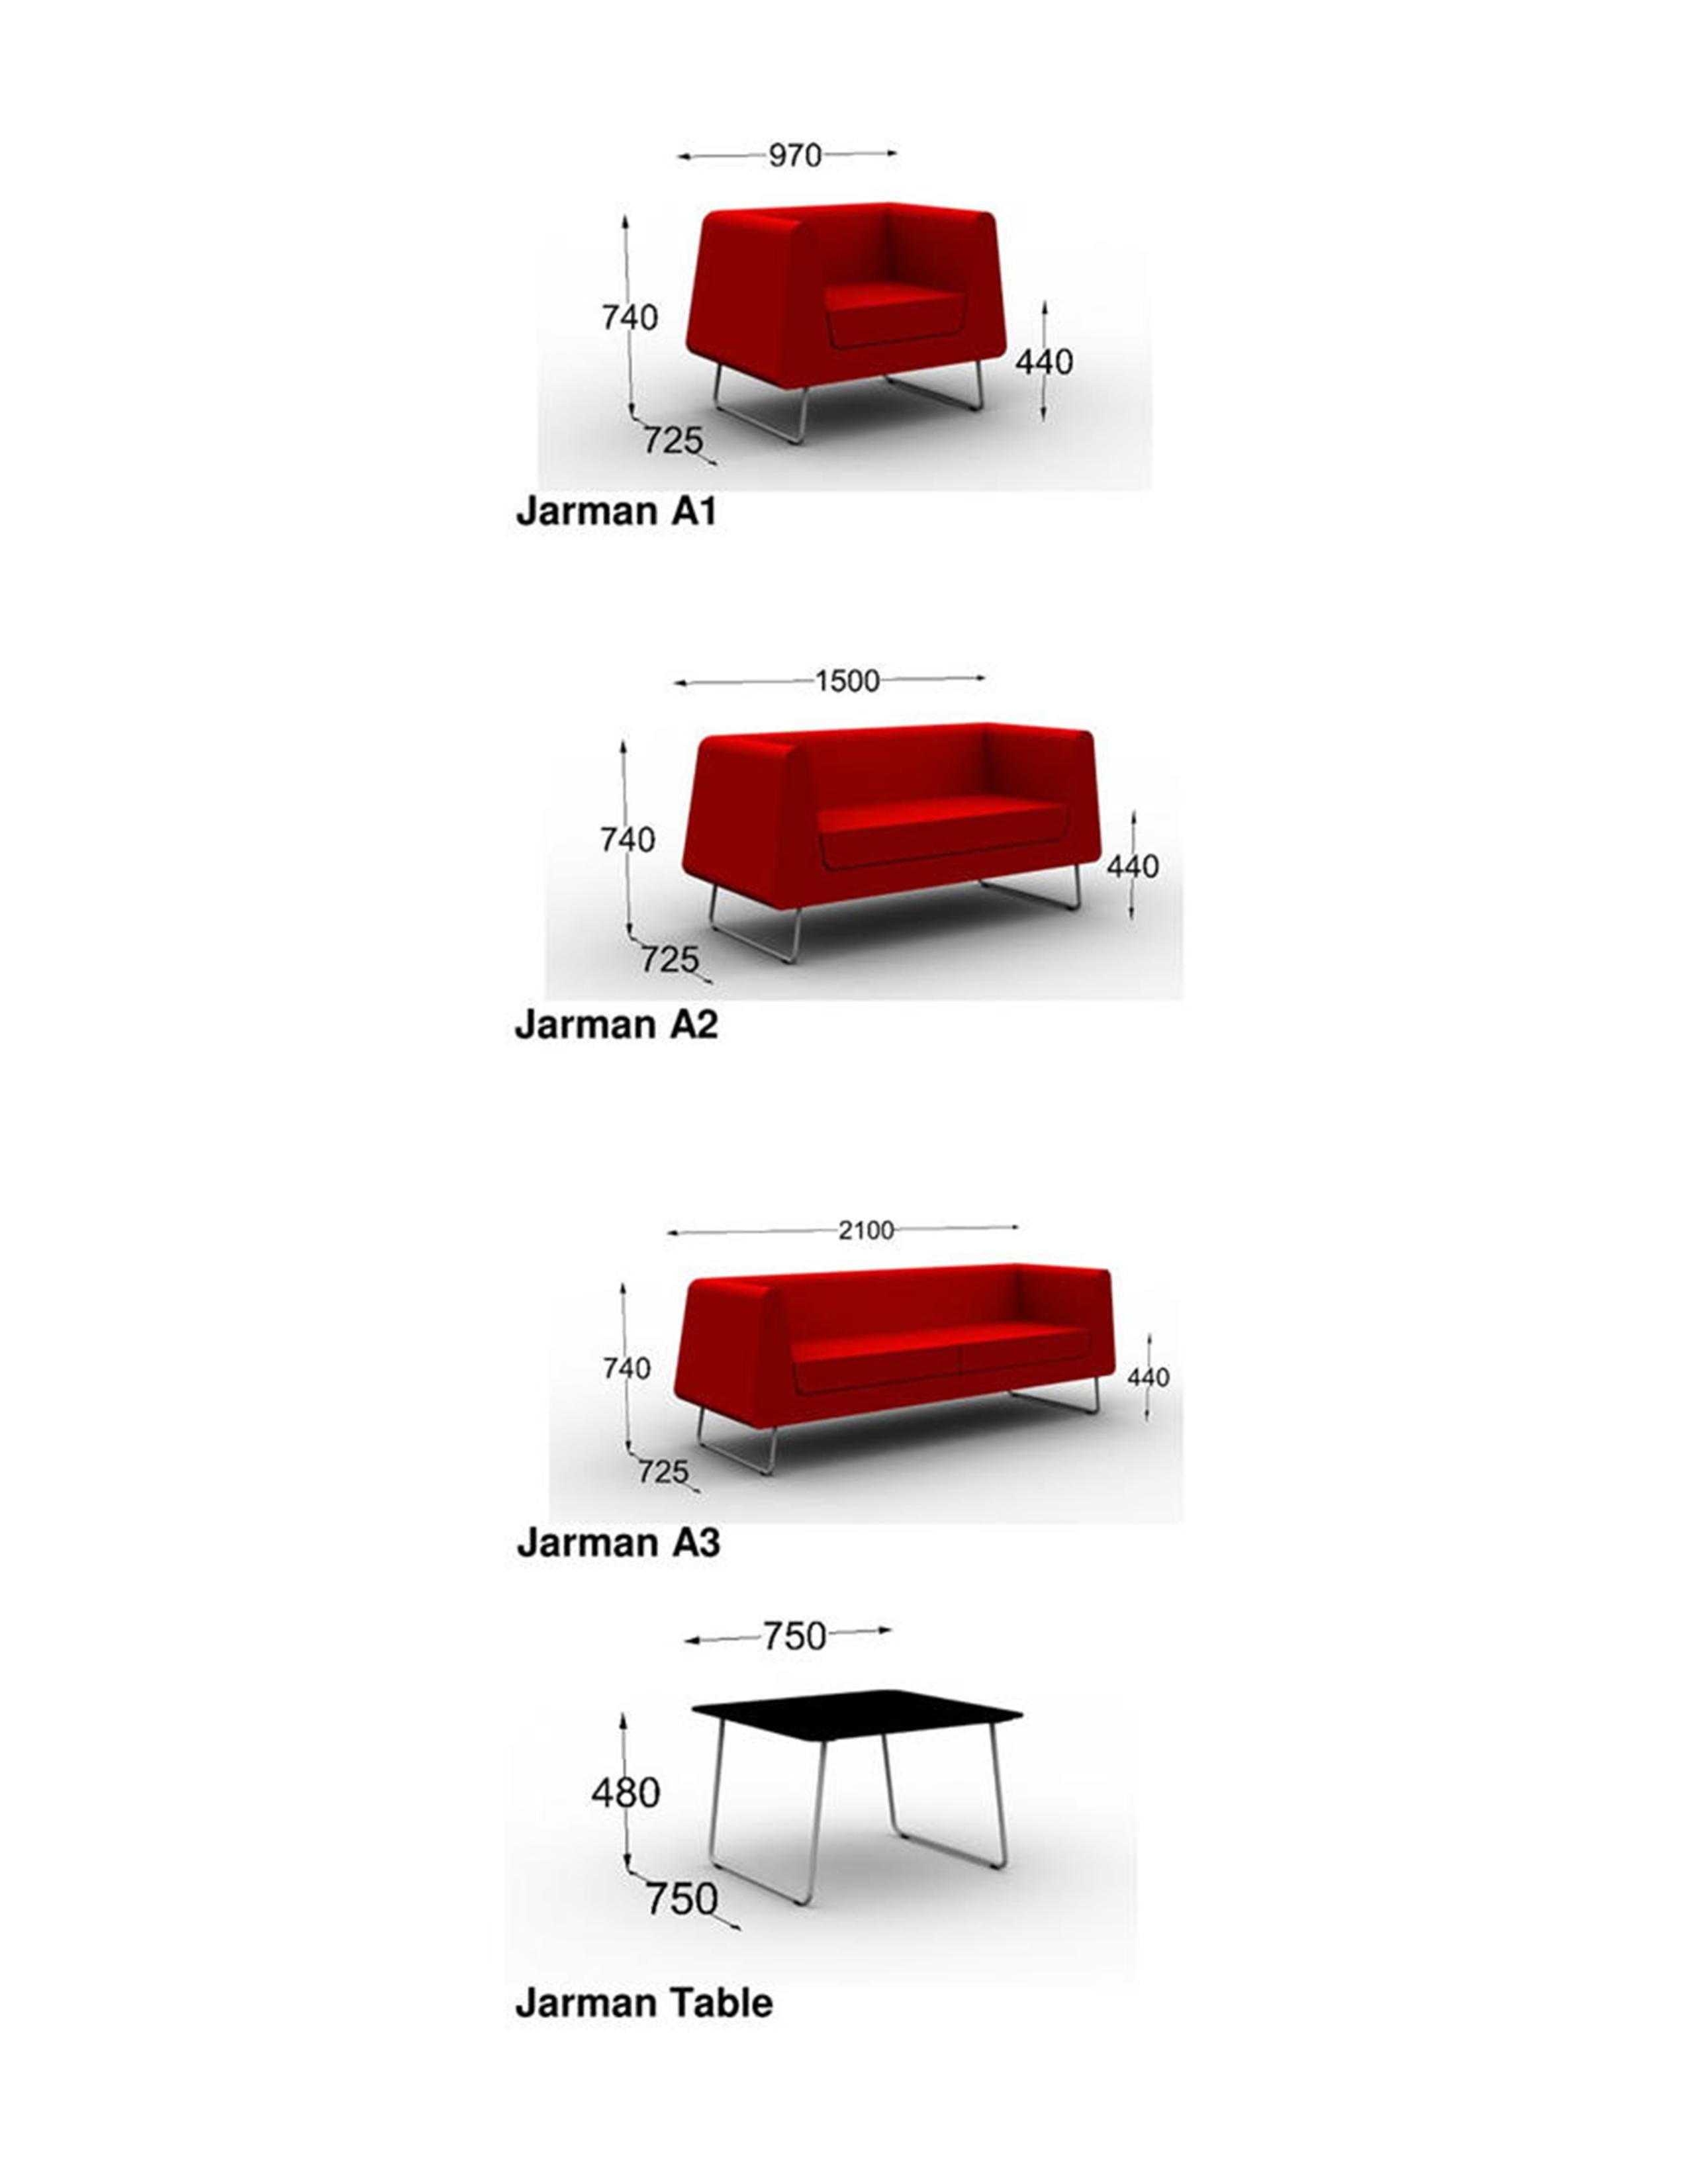 Jarman A1 lounge chair unites Minimalist aesthetic with comfortable ergonomics. When combined with other members of the Jarman product family it creates strikingly geometric lounge groups.
Jarman family by Steinar Hindenes follows a formal typology